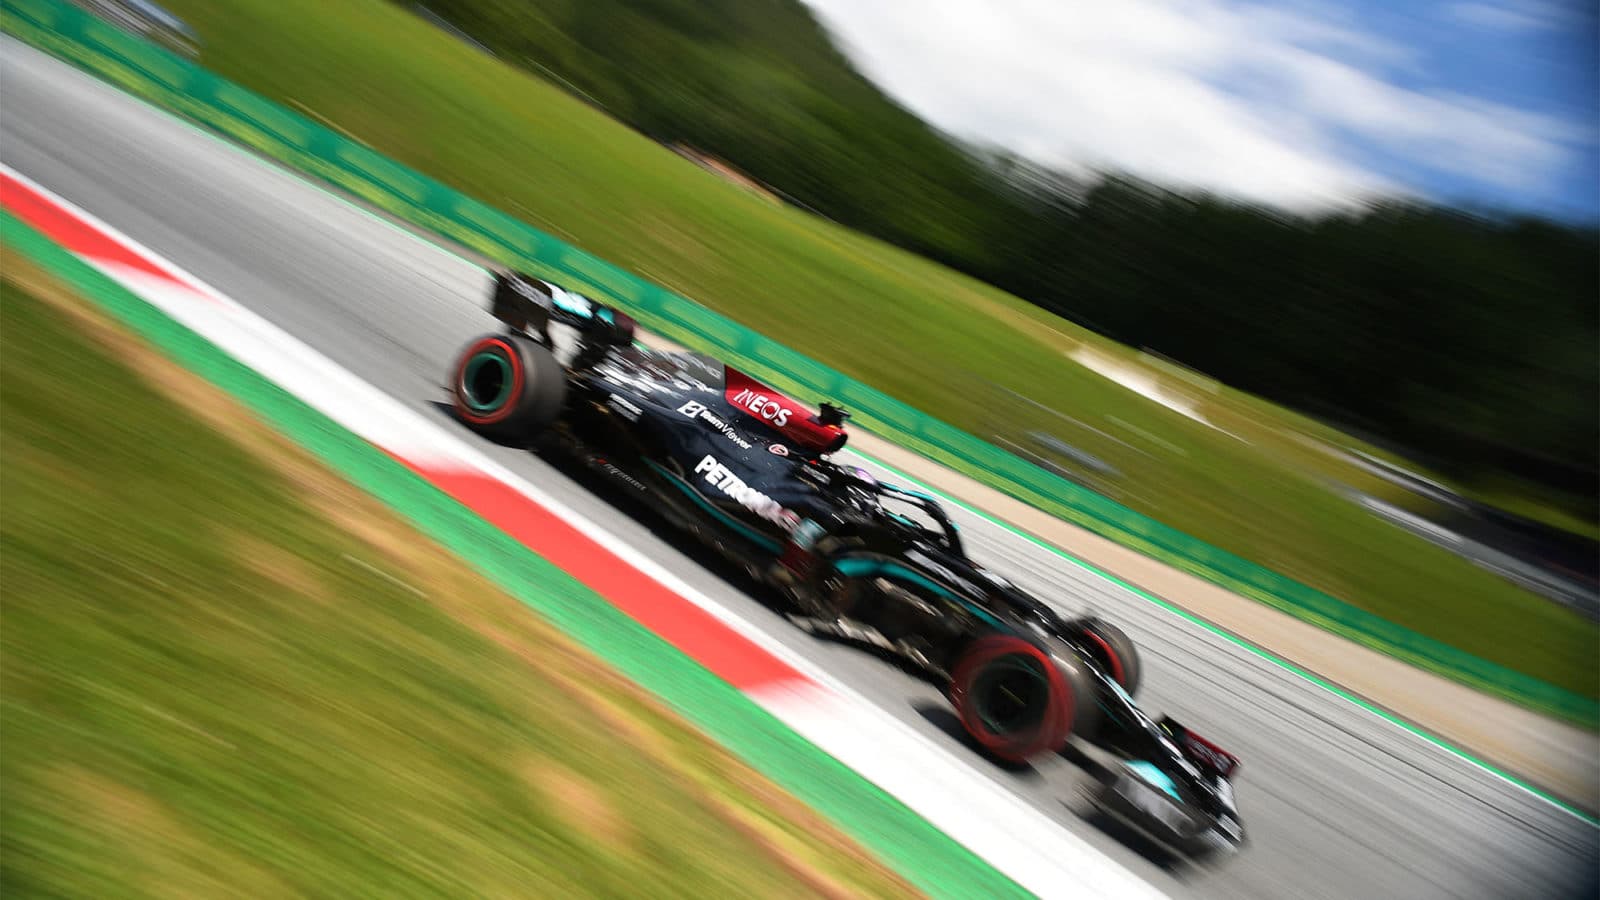 Mercedes' British driver Lewis Hamilton drives during the third practice session at the Red Bull Ring race track in Spielberg, Austria, on June 26, 2021, ahead of the Formula One Styrian Grand Prix. (Photo by JOE KLAMAR / AFP) (Photo by JOE KLAMAR/AFP via Getty Images)